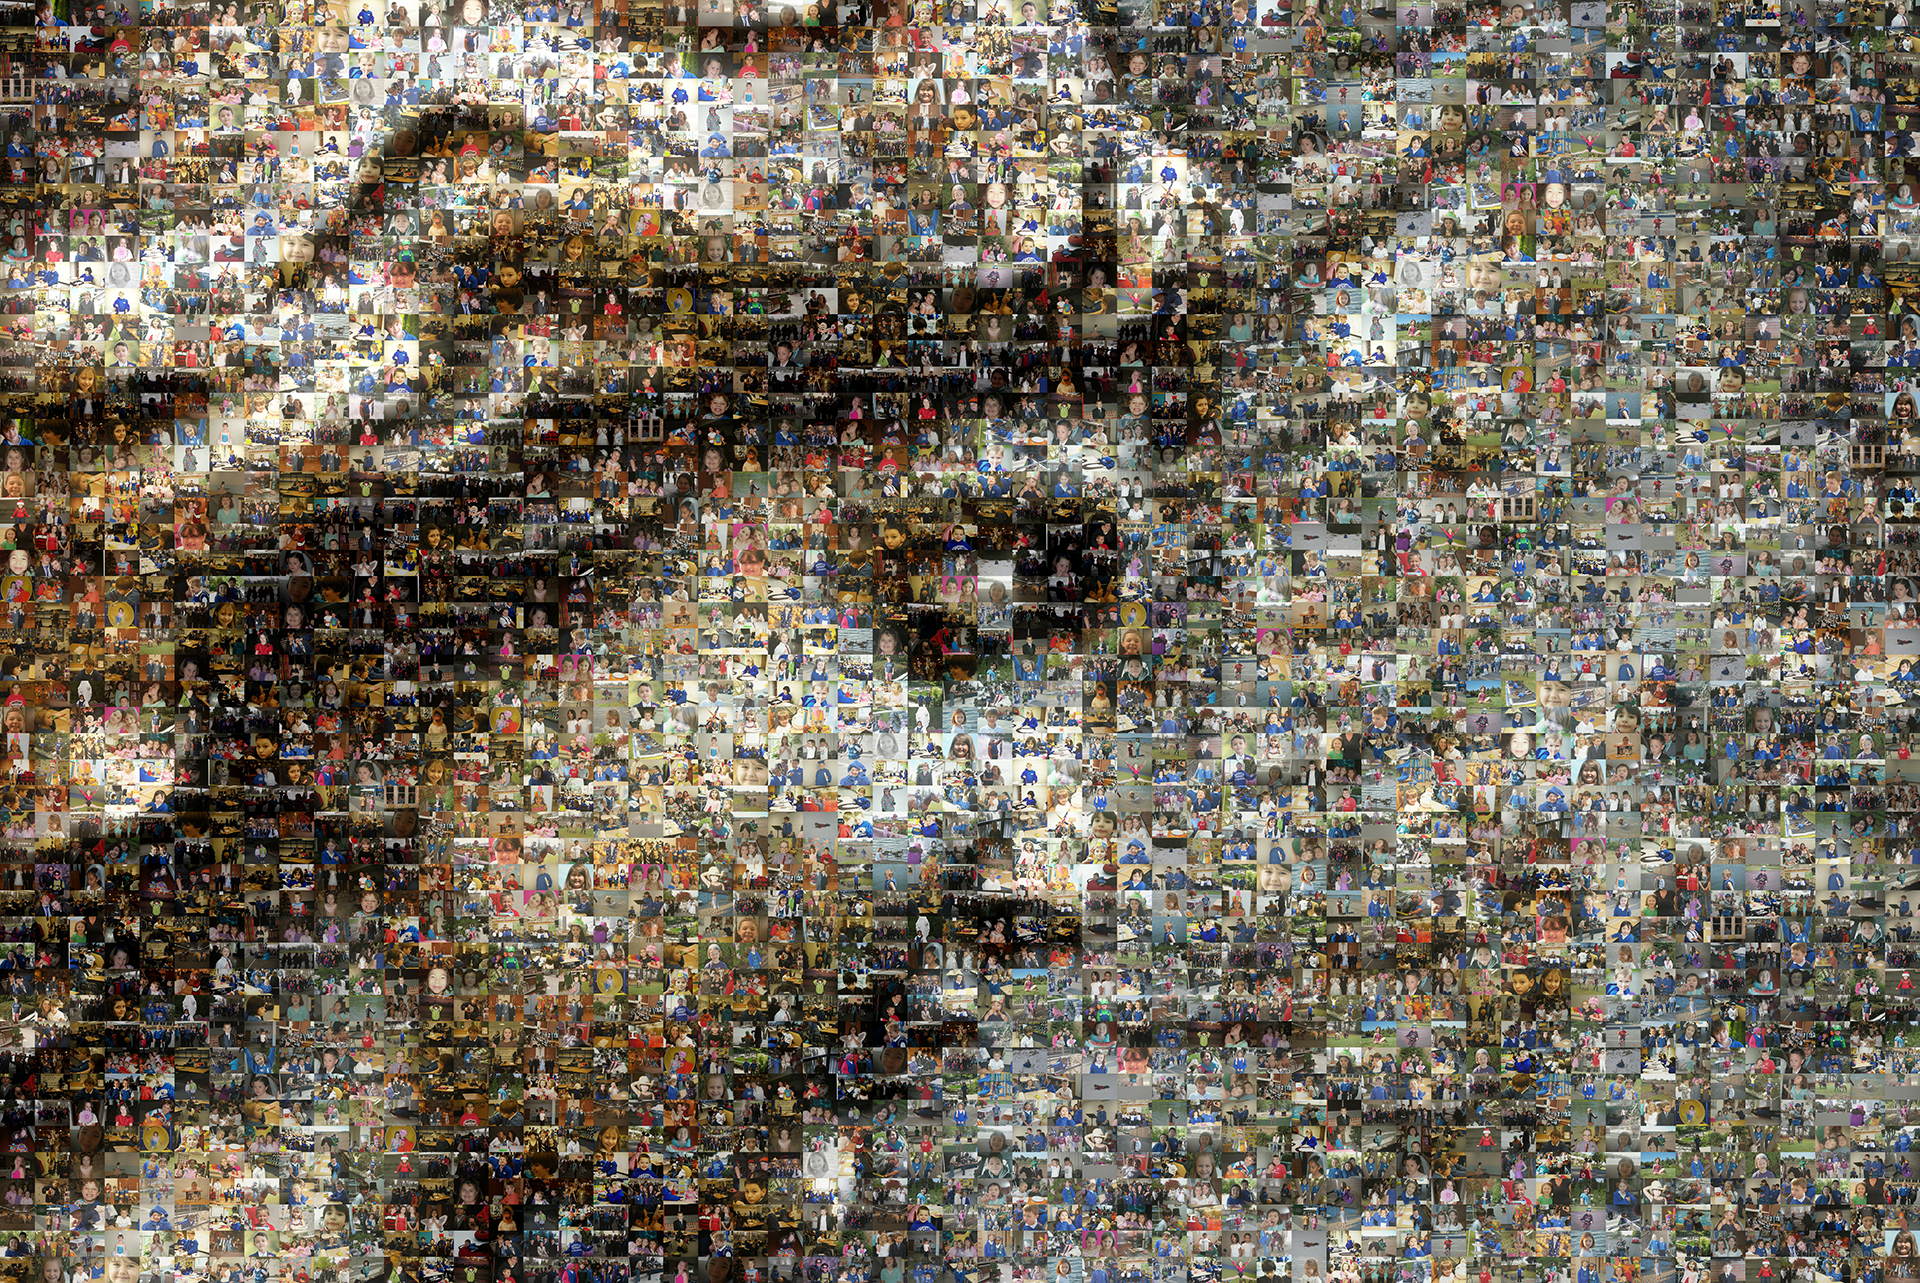 photo mosaic a carving from the side of a school building was used as the source image with 442 student photos for the cell images